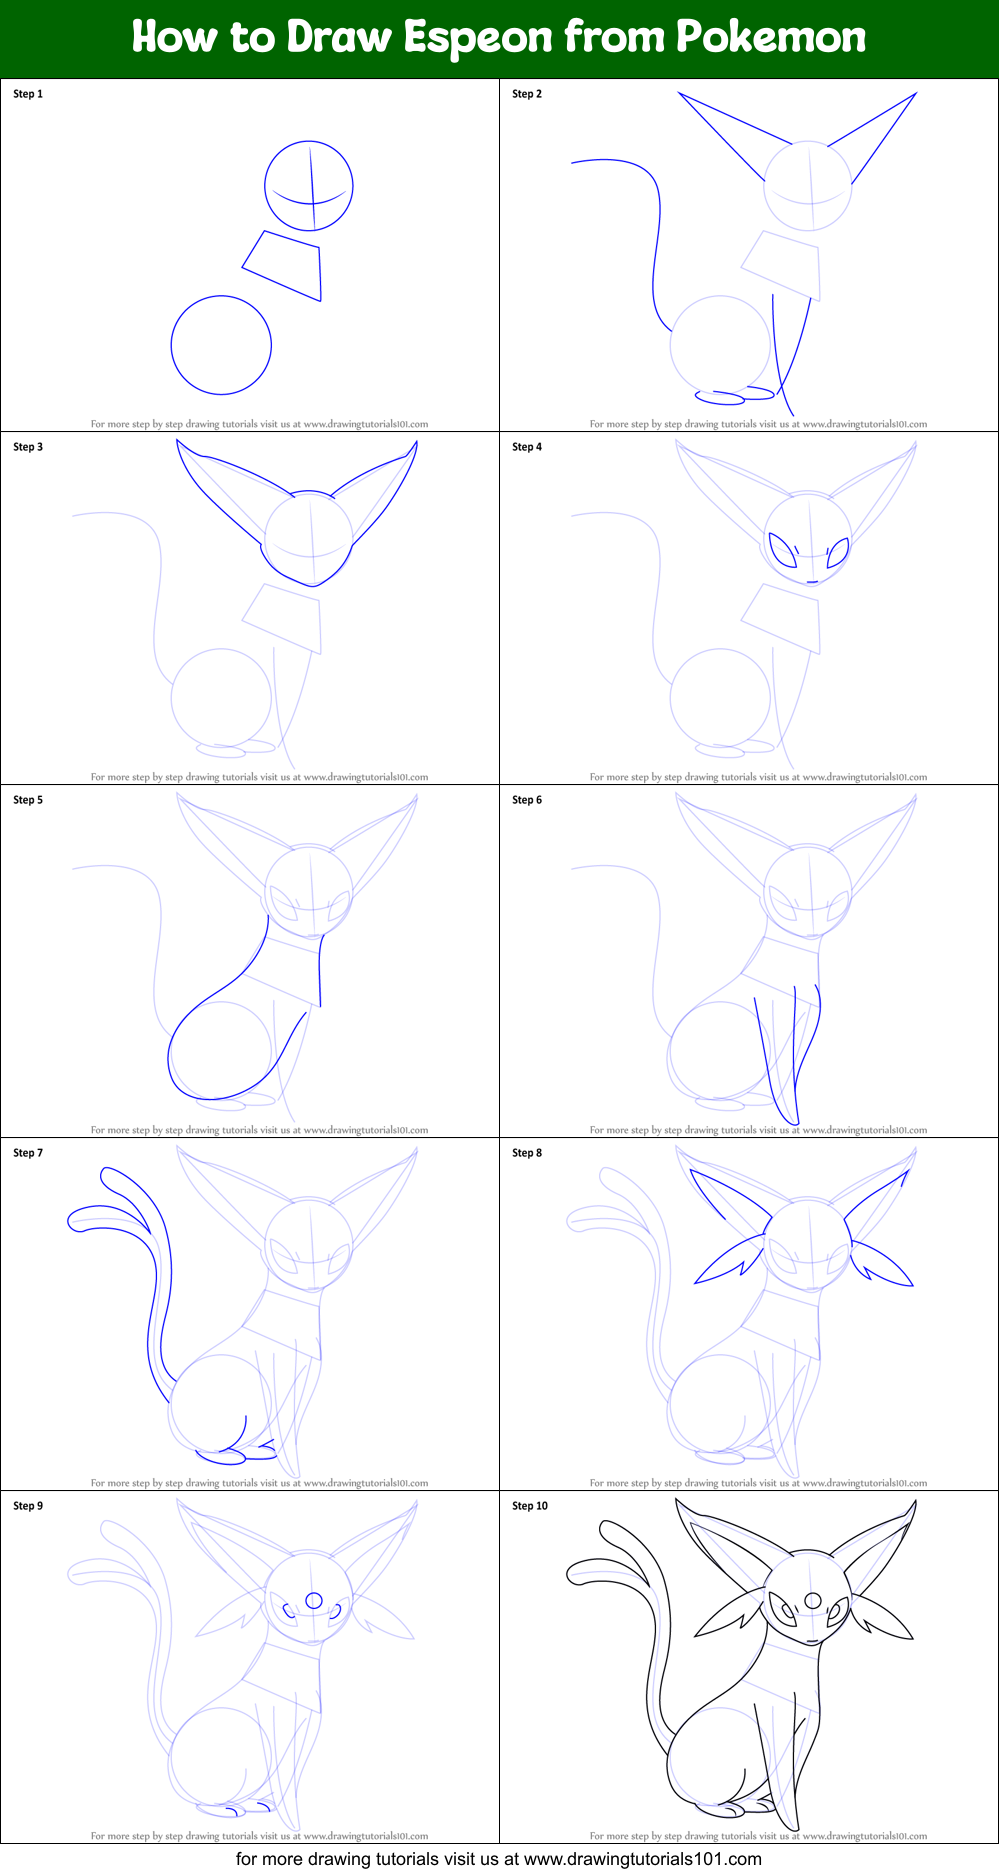 How to Draw Espeon from Pokemon (Pokemon) Step by Step